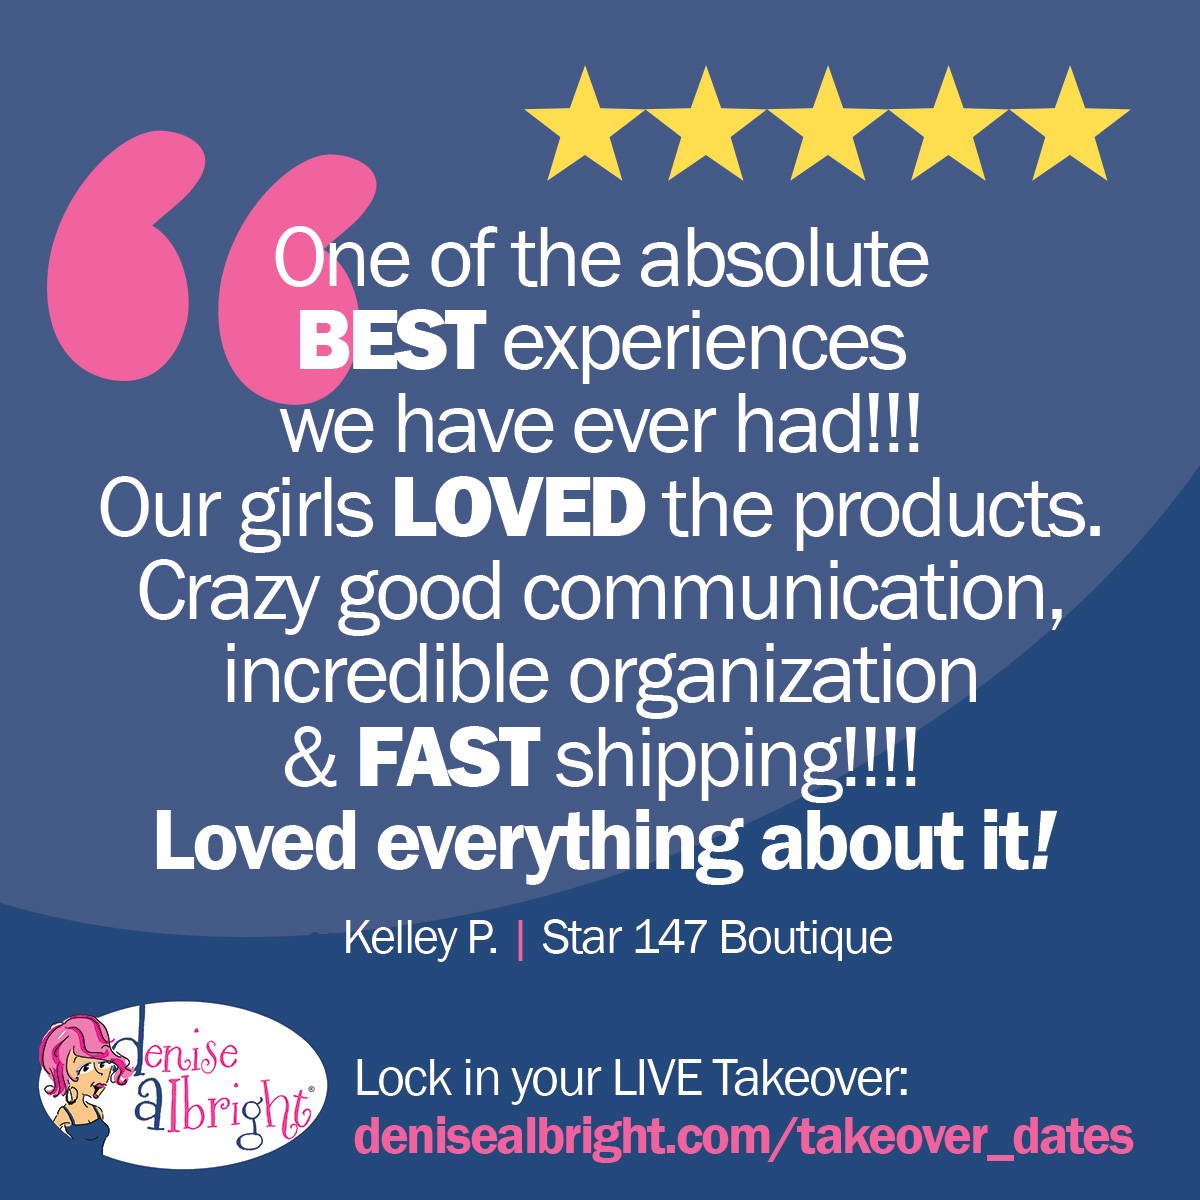 Review from Kelley P.